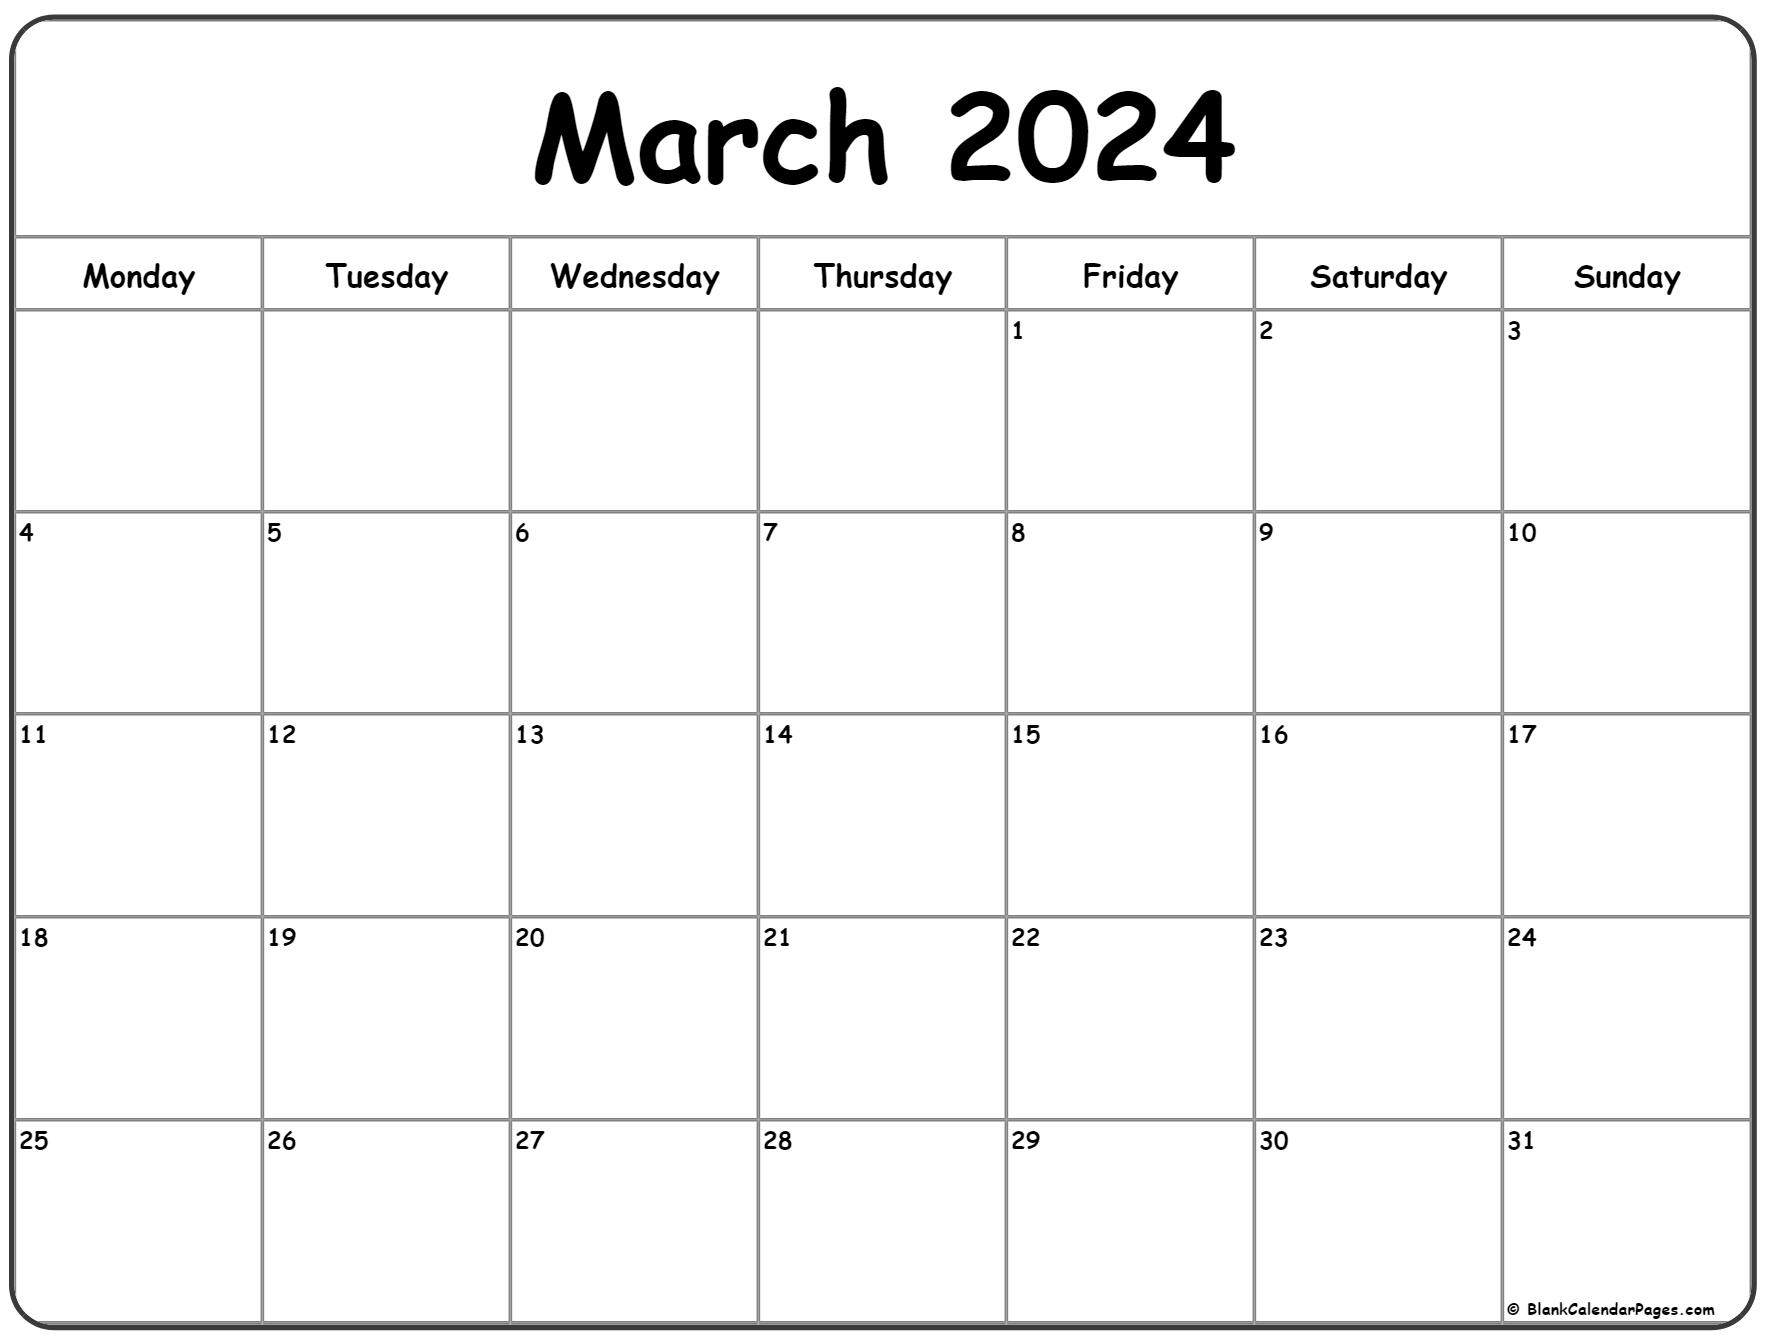 March 2024 Monday Calendar | Monday To Sunday for Month Of March 2024 Printable Calendar